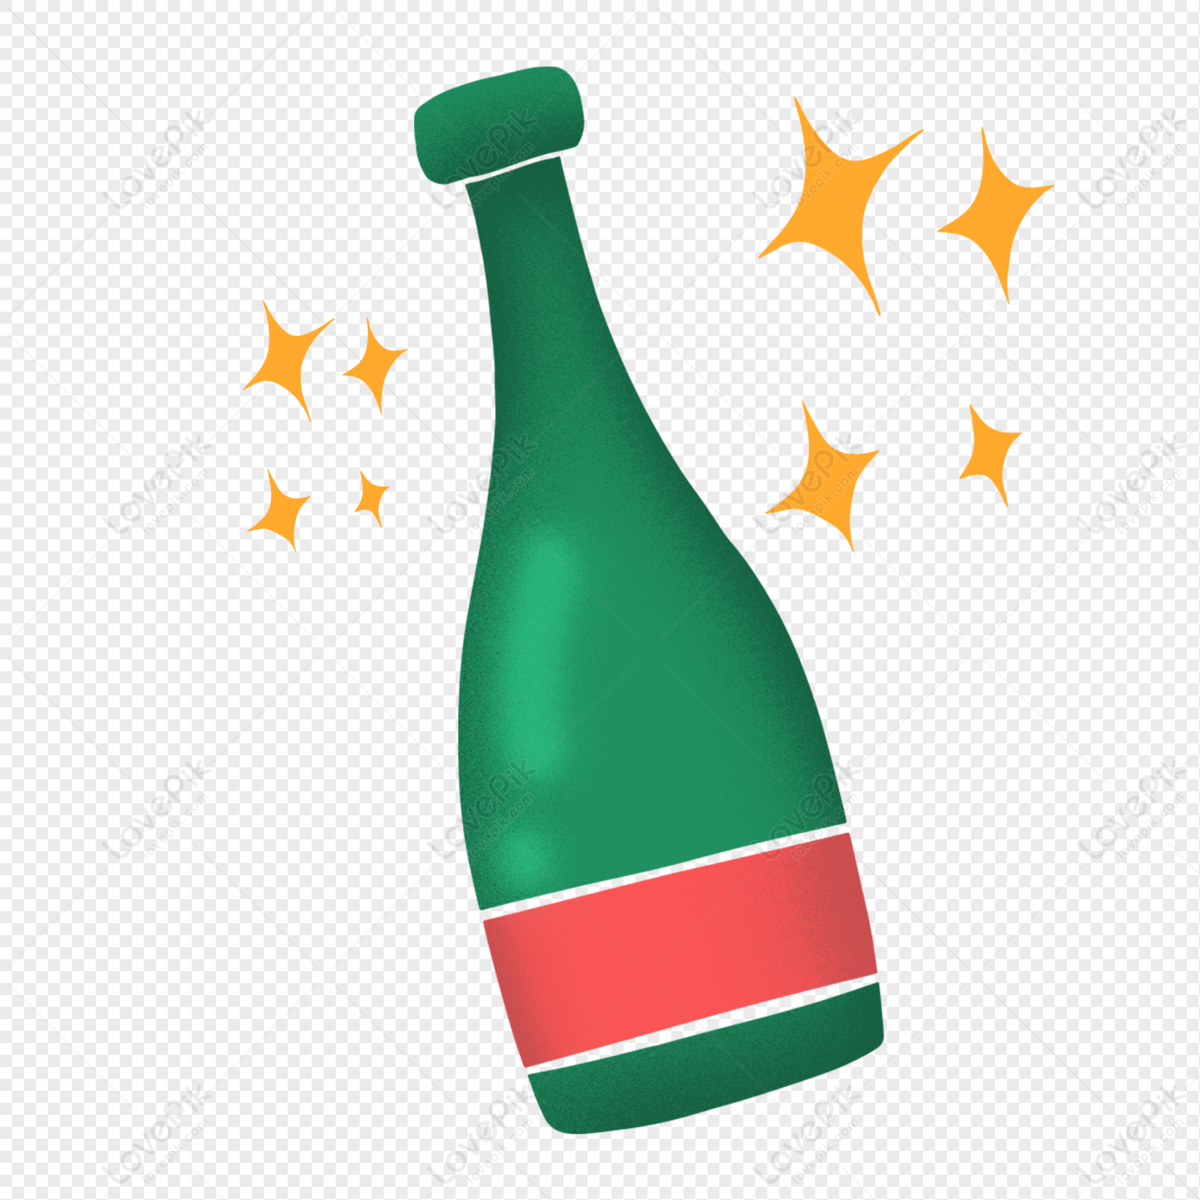 Cartoon Green Wine Bottle Illustration PNG Hd Transparent Image And Clipart  Image For Free Download - Lovepik | 401274814